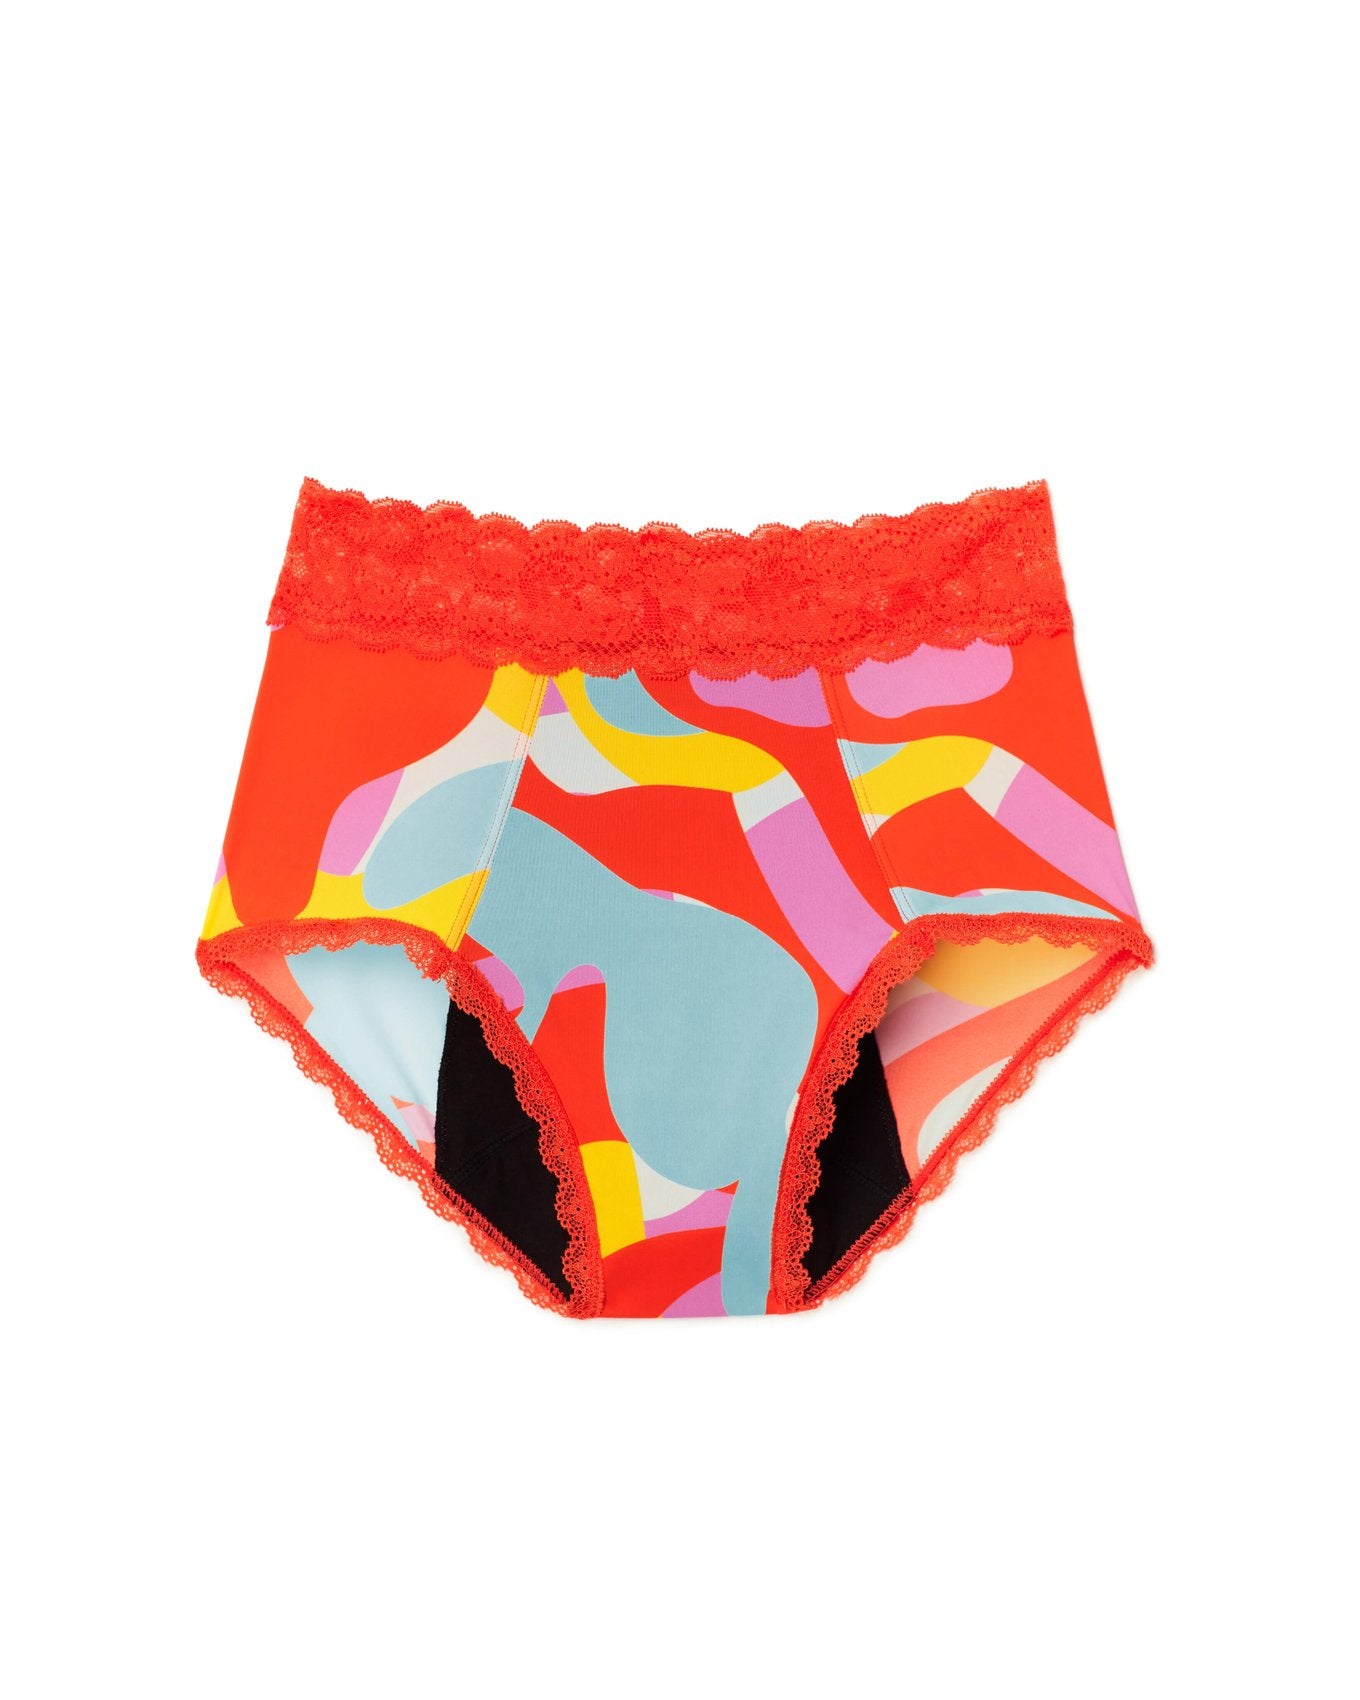 Joyja Amelia period-proof panty in color Abstract Forms C02 and shape high waisted